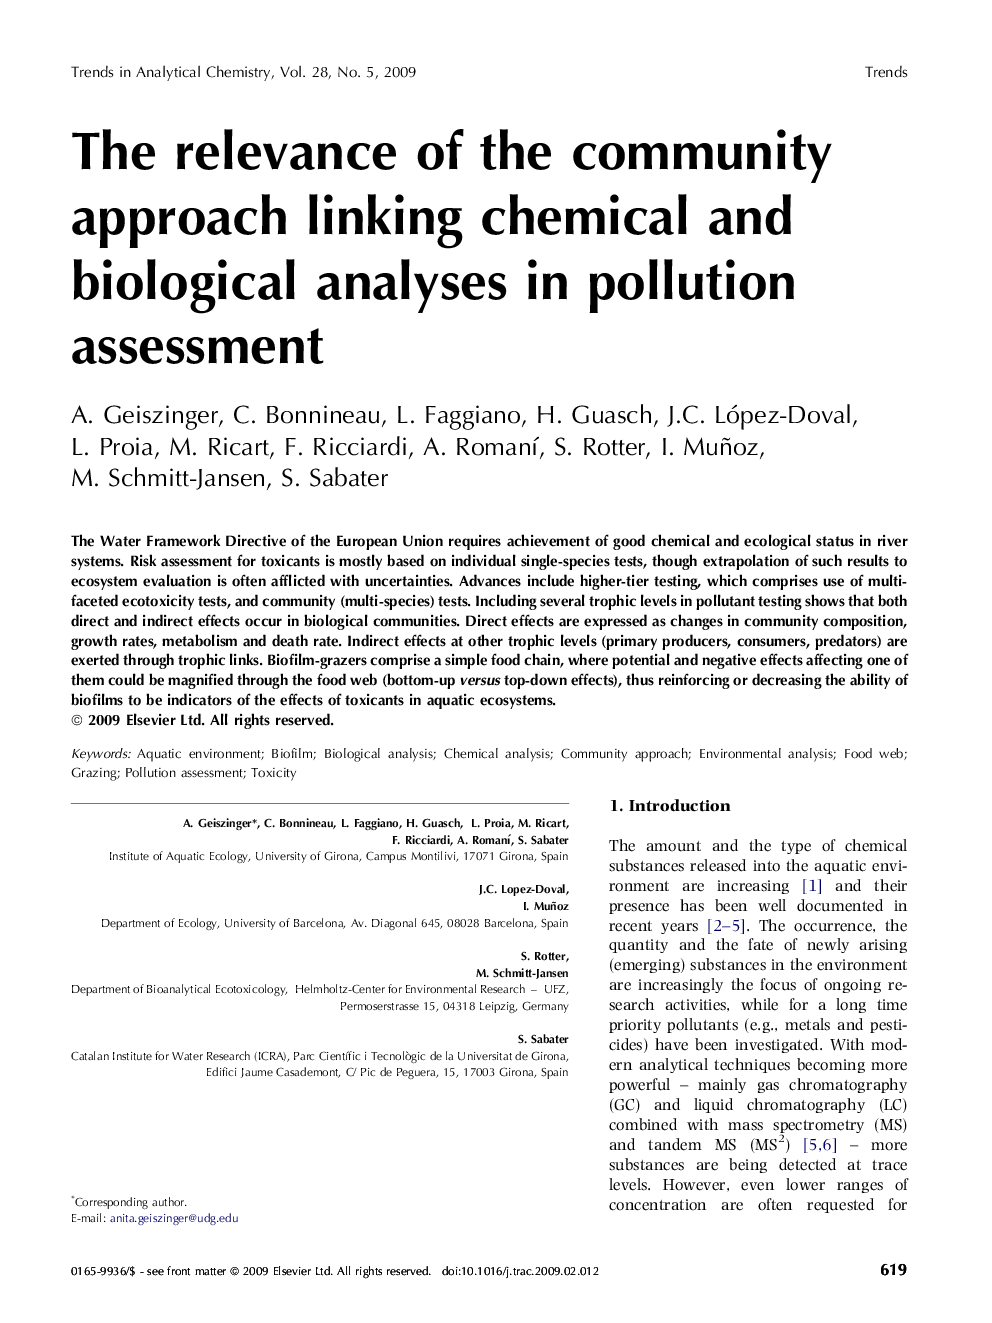 The relevance of the community approach linking chemical and biological analyses in pollution assessment